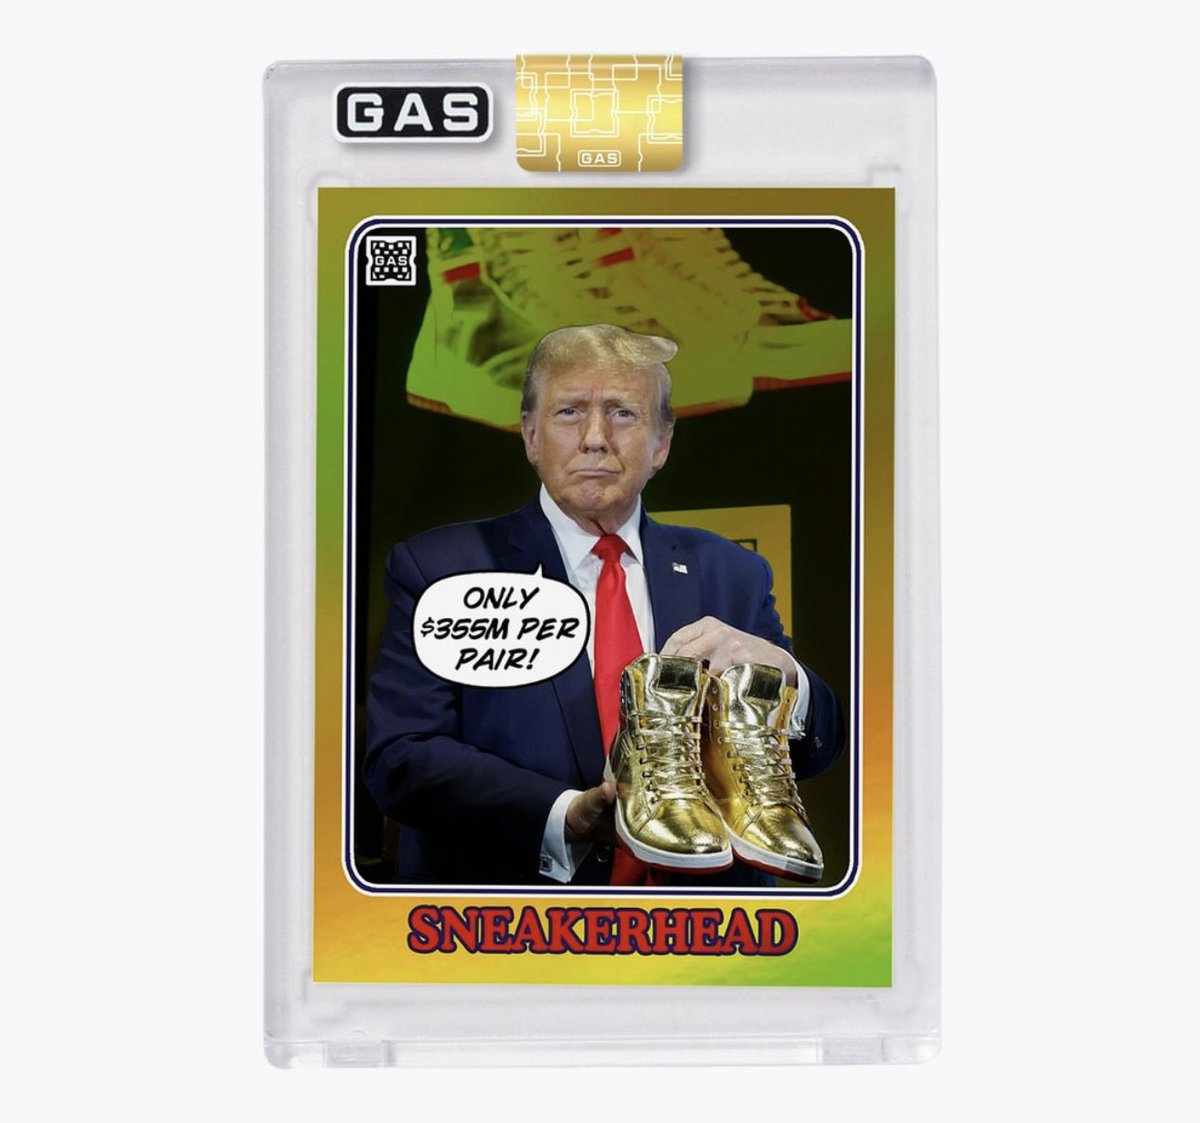 Shock Drop! Limited Edition GAS Donald Trump Sneakerhead Gold Foil Prism Cards Available for Preorder on GASTradingCards.com and @ntwrk TheNTWRK.com Now! Commemorating the news that Donald Trump has released his own branded golden sneakers!